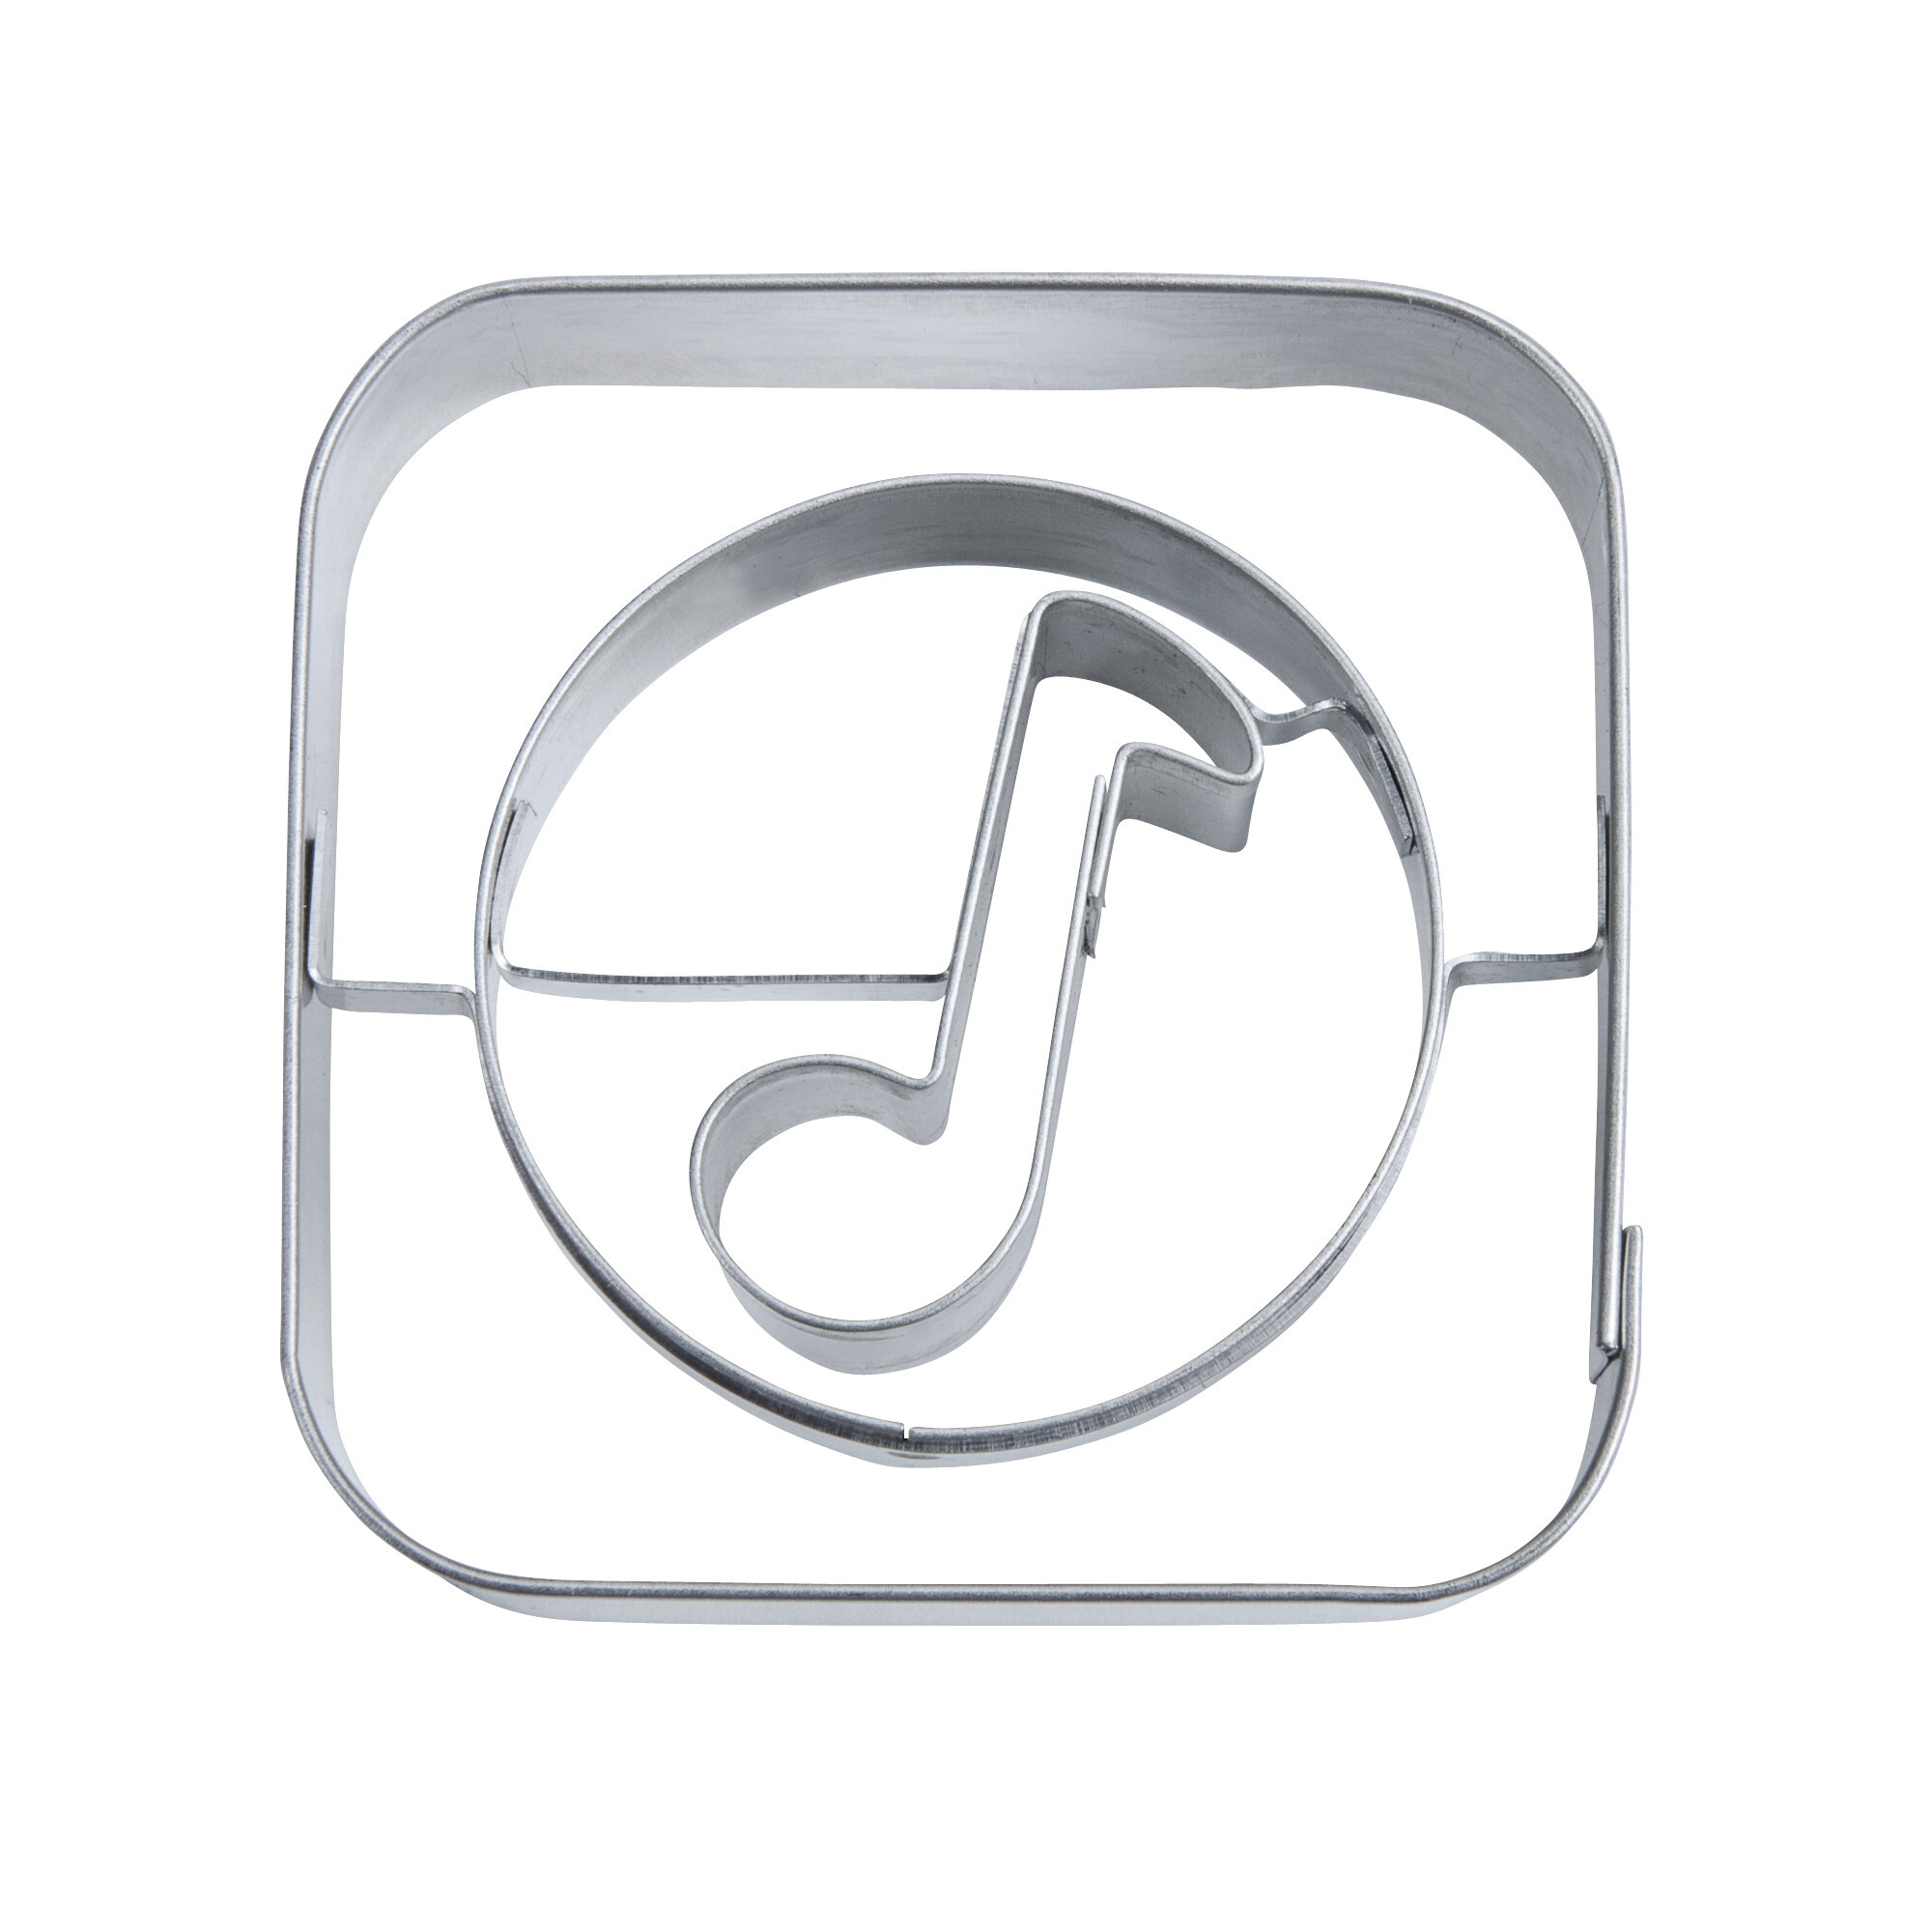 Cookie cutter with stamp – App-Cutter music